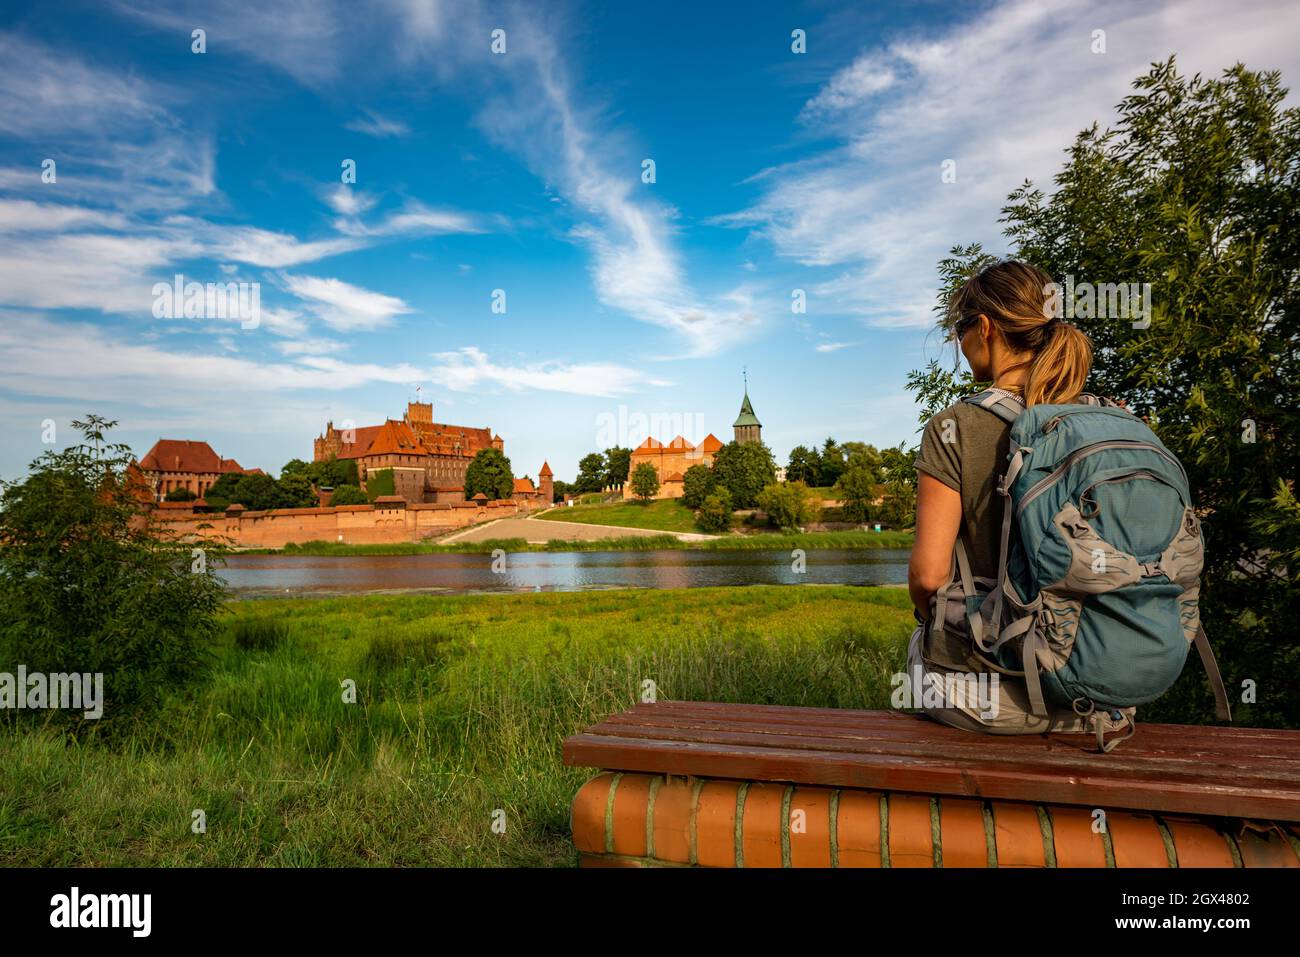 Visiting Poland, tourist enjoys the view of famous unesco site Castle of the Teutonic Order in Malbork Stock Photo